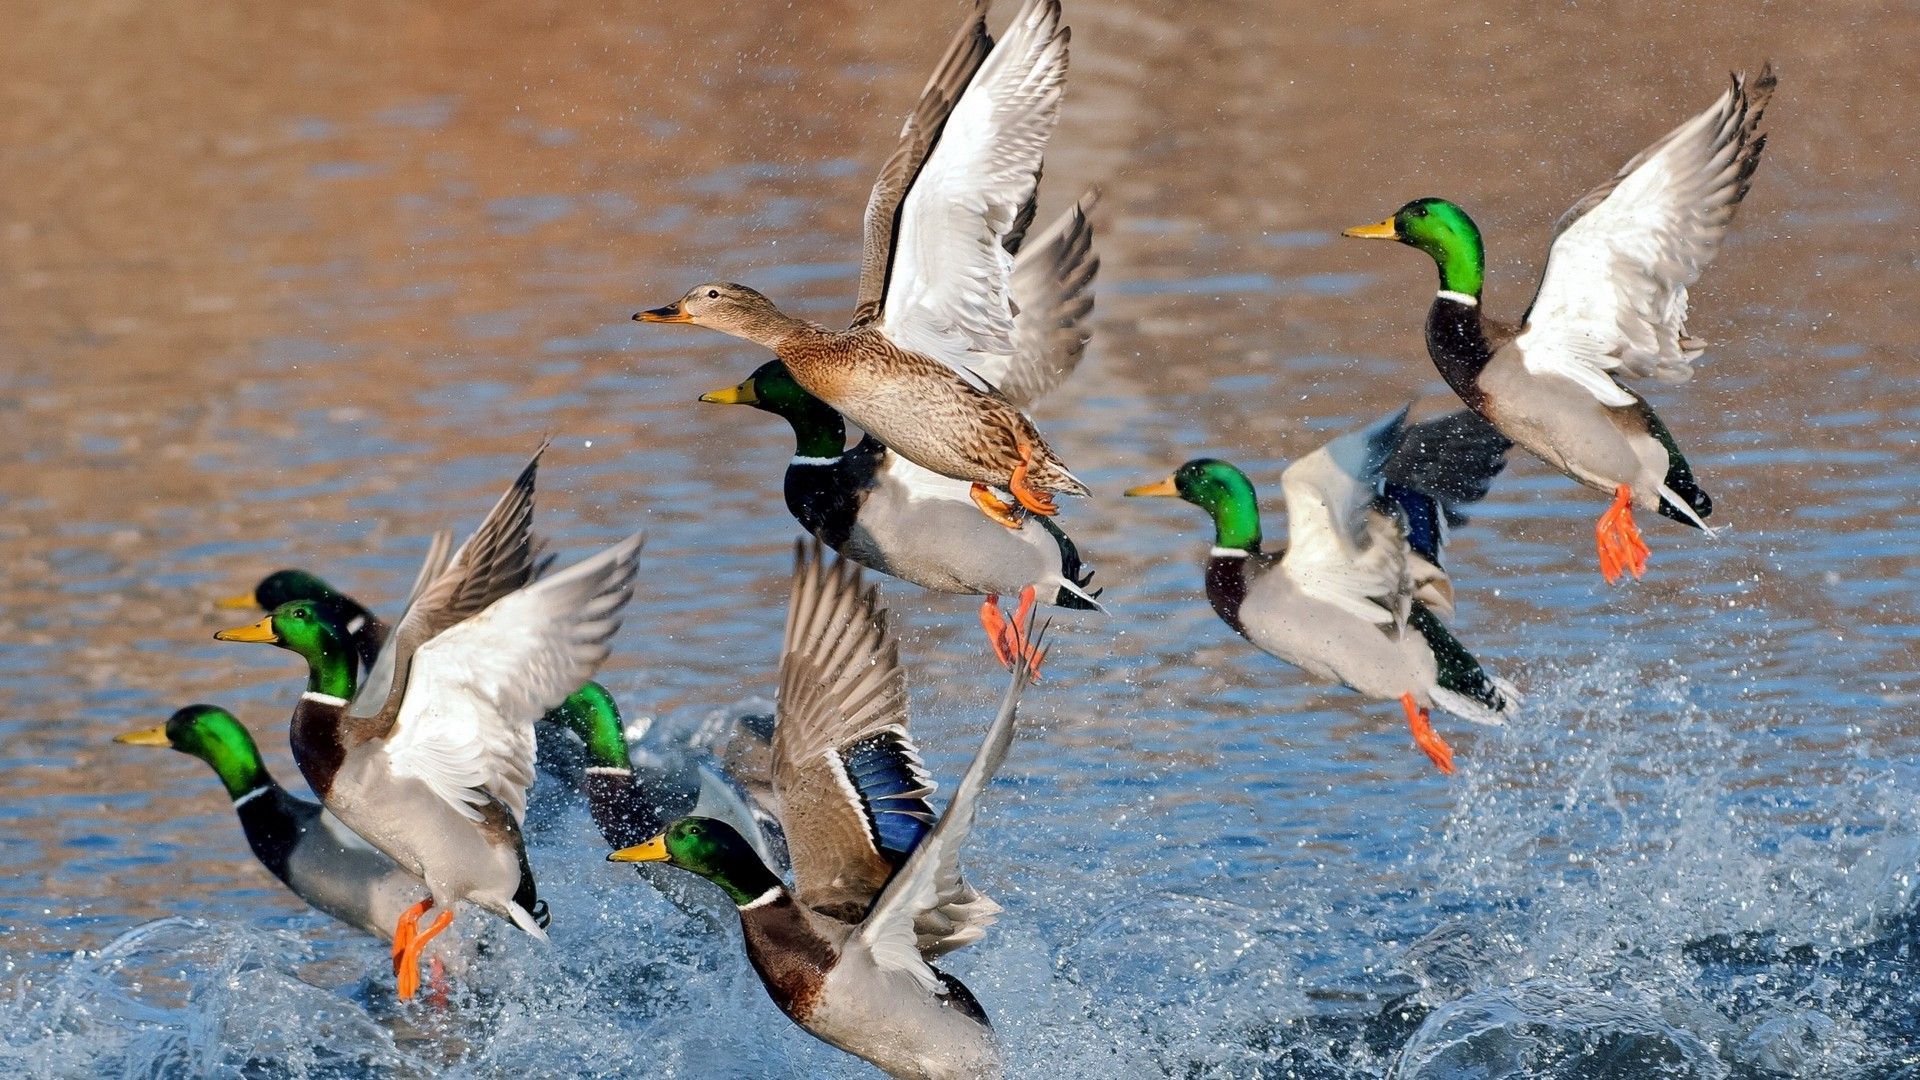 Flying Ducks Together With Duck Flying Away Together With Flying,Nasturtium Climbing